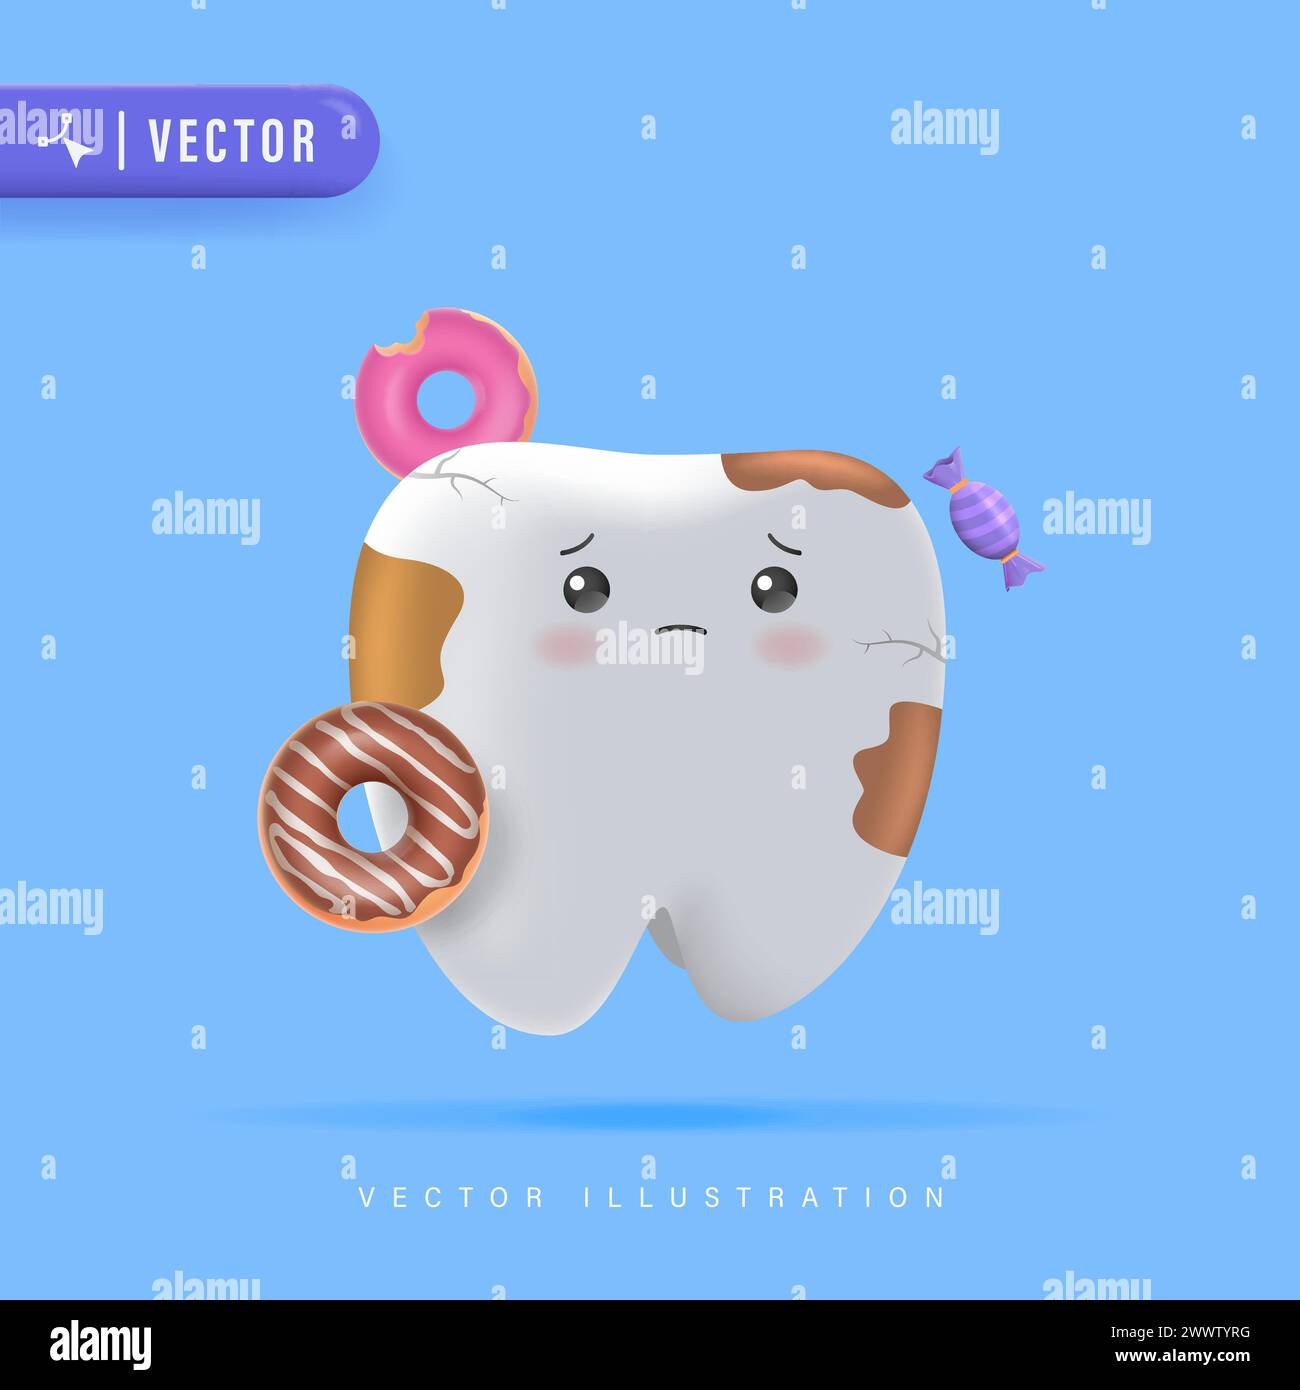 Tooth Decay Vector Illustration for Children Dental Clinic Poster Template Design. Cracked or Broken Teeth Illustration. Dental Plague Character Stock Vector